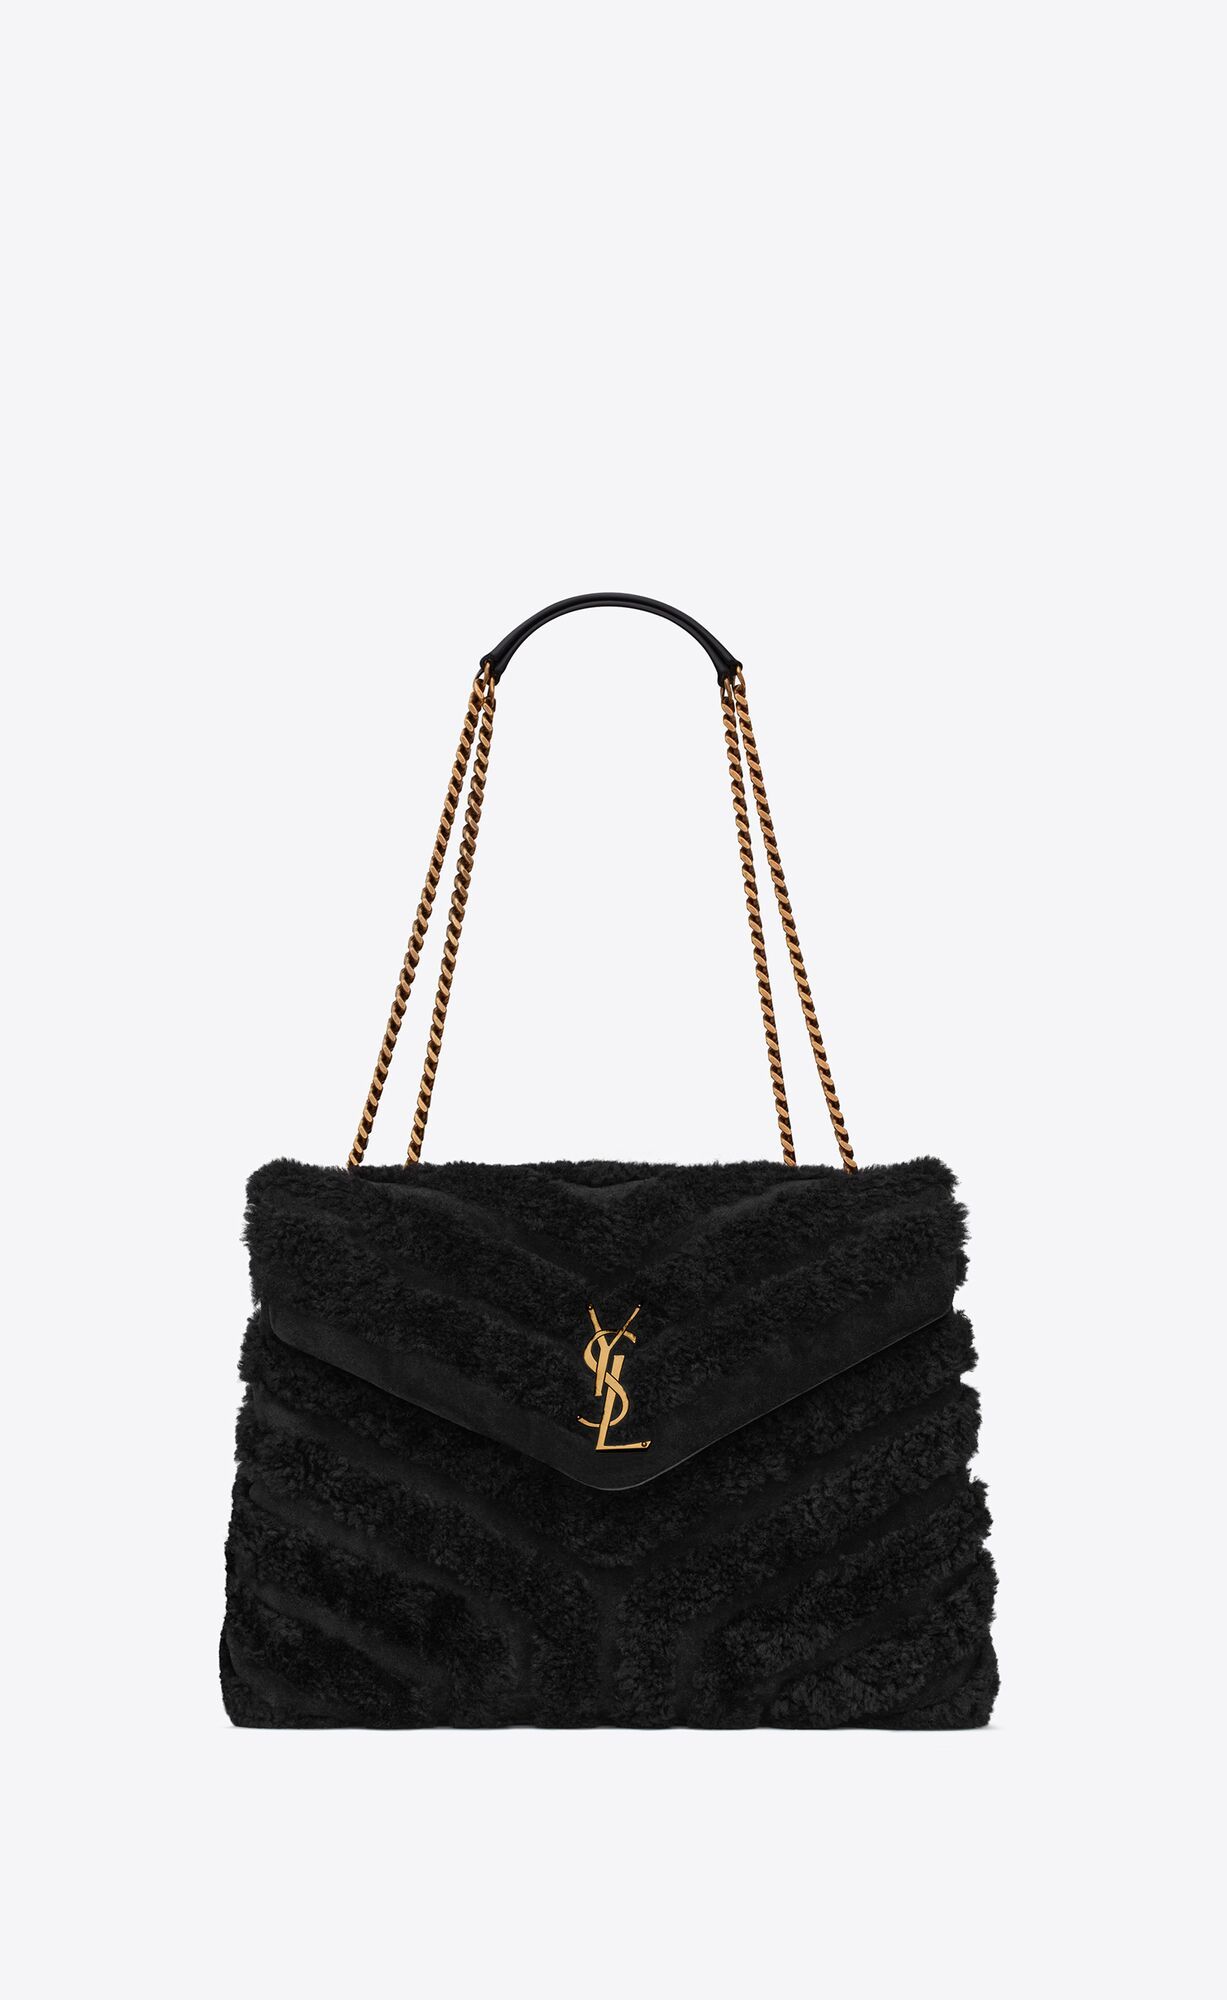 LOULOU MEDIUM CHAIN BAG IN QUILTED "Y" SHEARLING AND SUEDE PATCHWORK | Saint Laurent | YSL.com | Saint Laurent Inc. (Global)